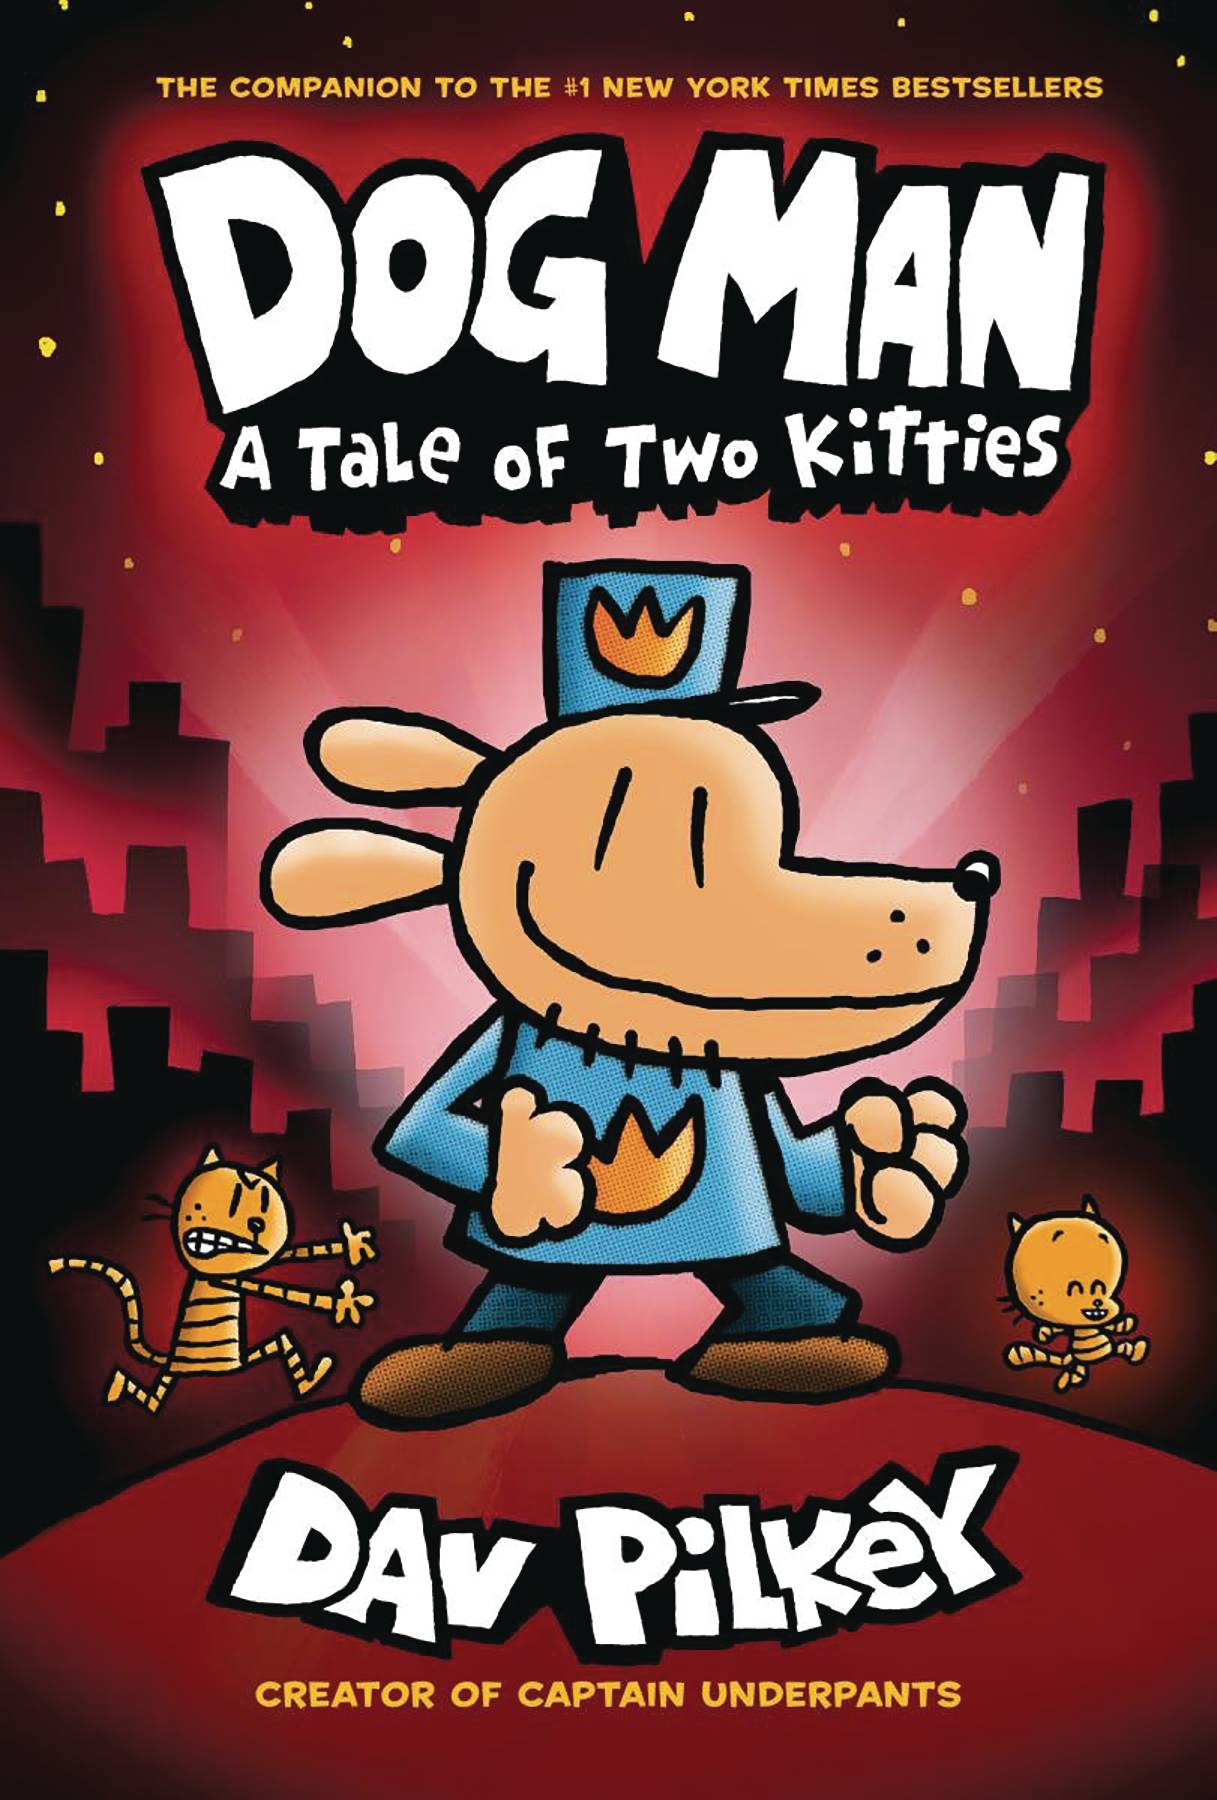 Dog Man Hardcover Graphic Novel With Dust Jacket Volume 3 Tale of Two Kitties